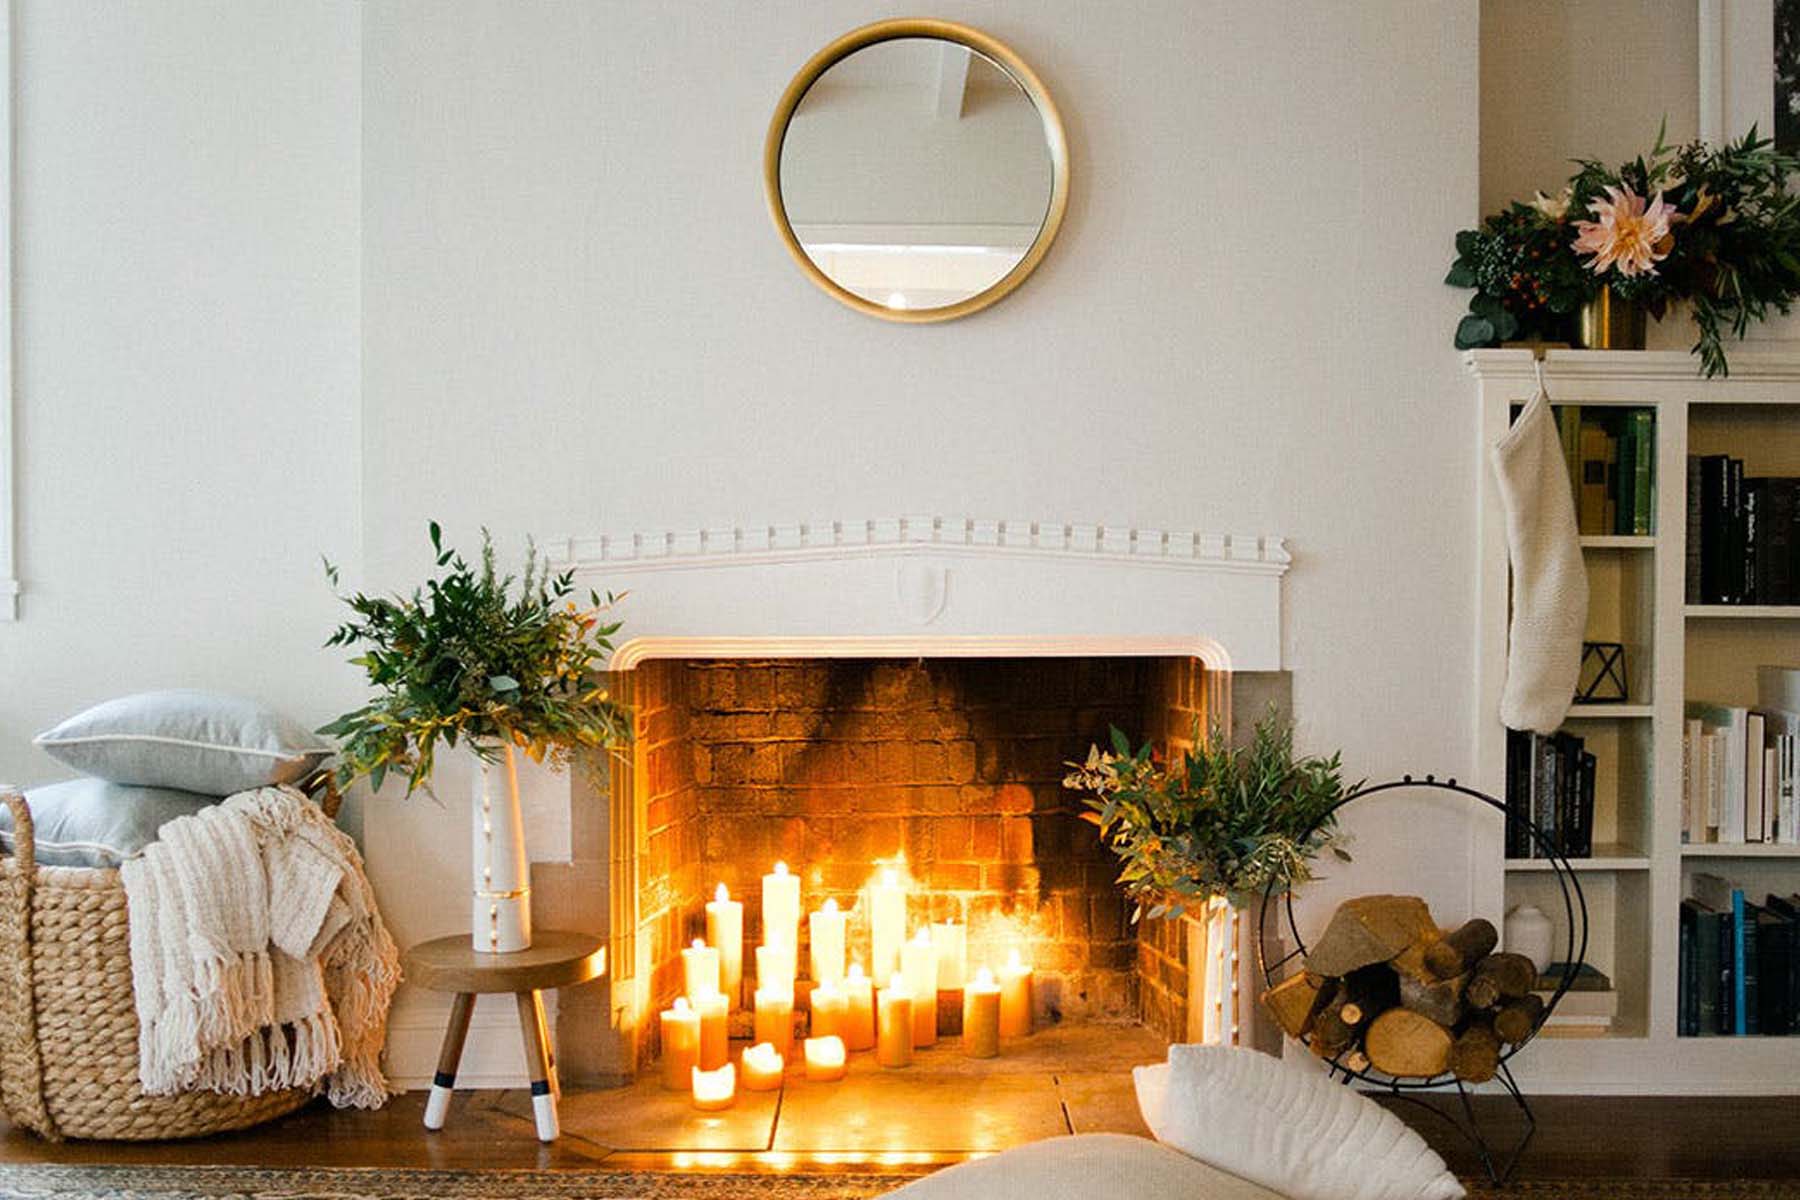 Cultivating Comfort: The Essentials Of Hygge In Home Design